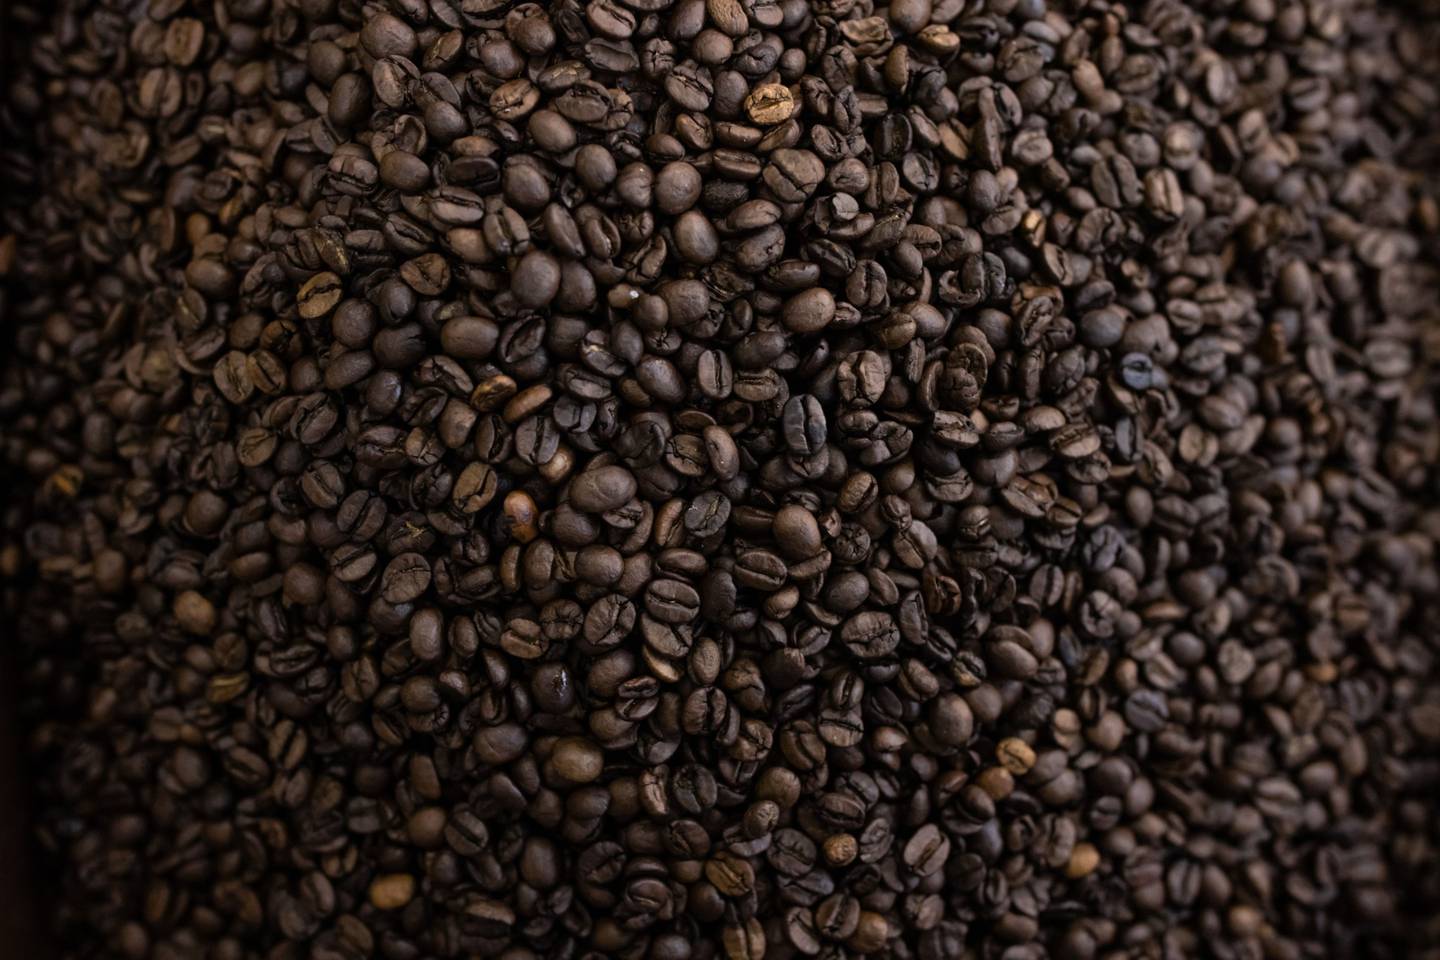 Coffee beans in a roasting facility in Caconde, Sao Paulo state, Brazil.